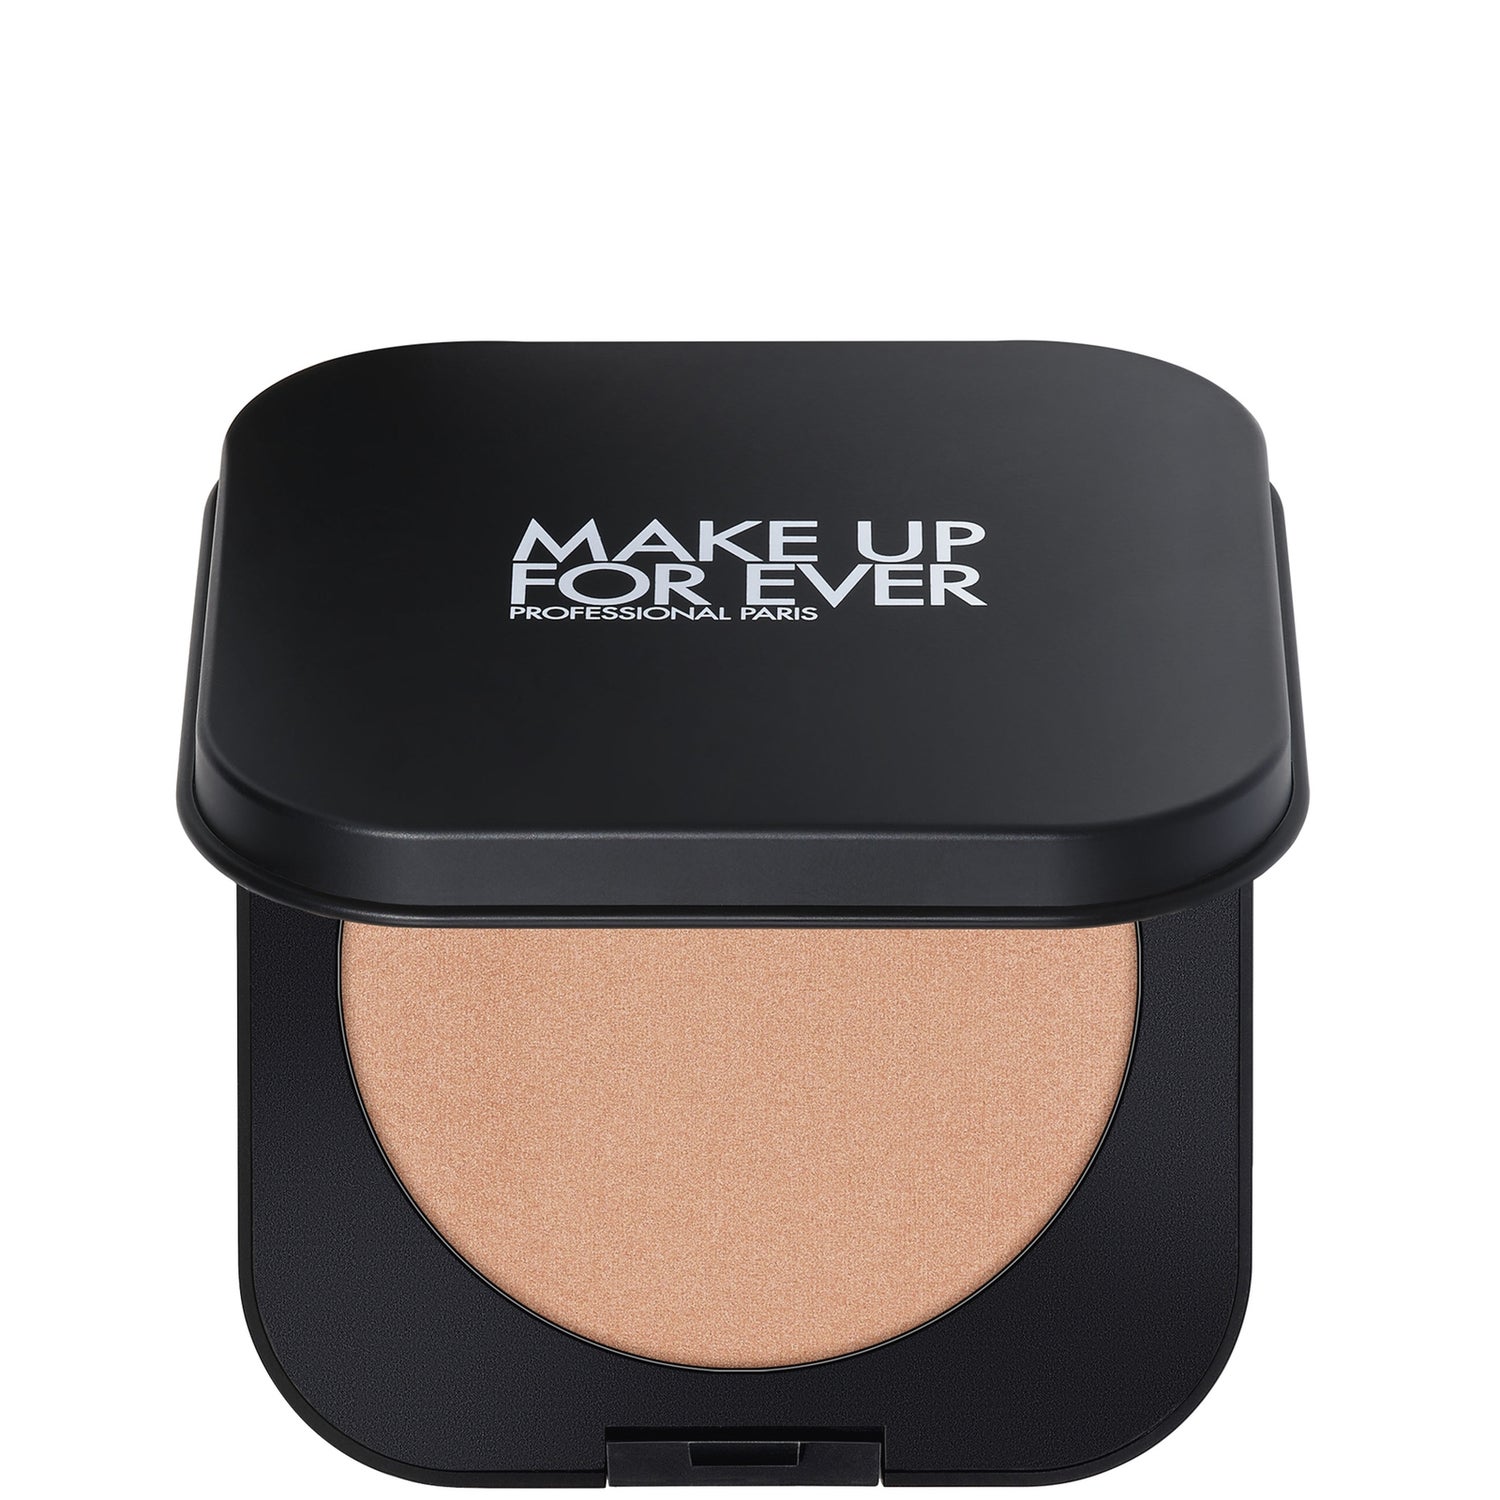 MAKE UP FOR EVER Artist Face Powders Bronzer 10g (Various Shades)